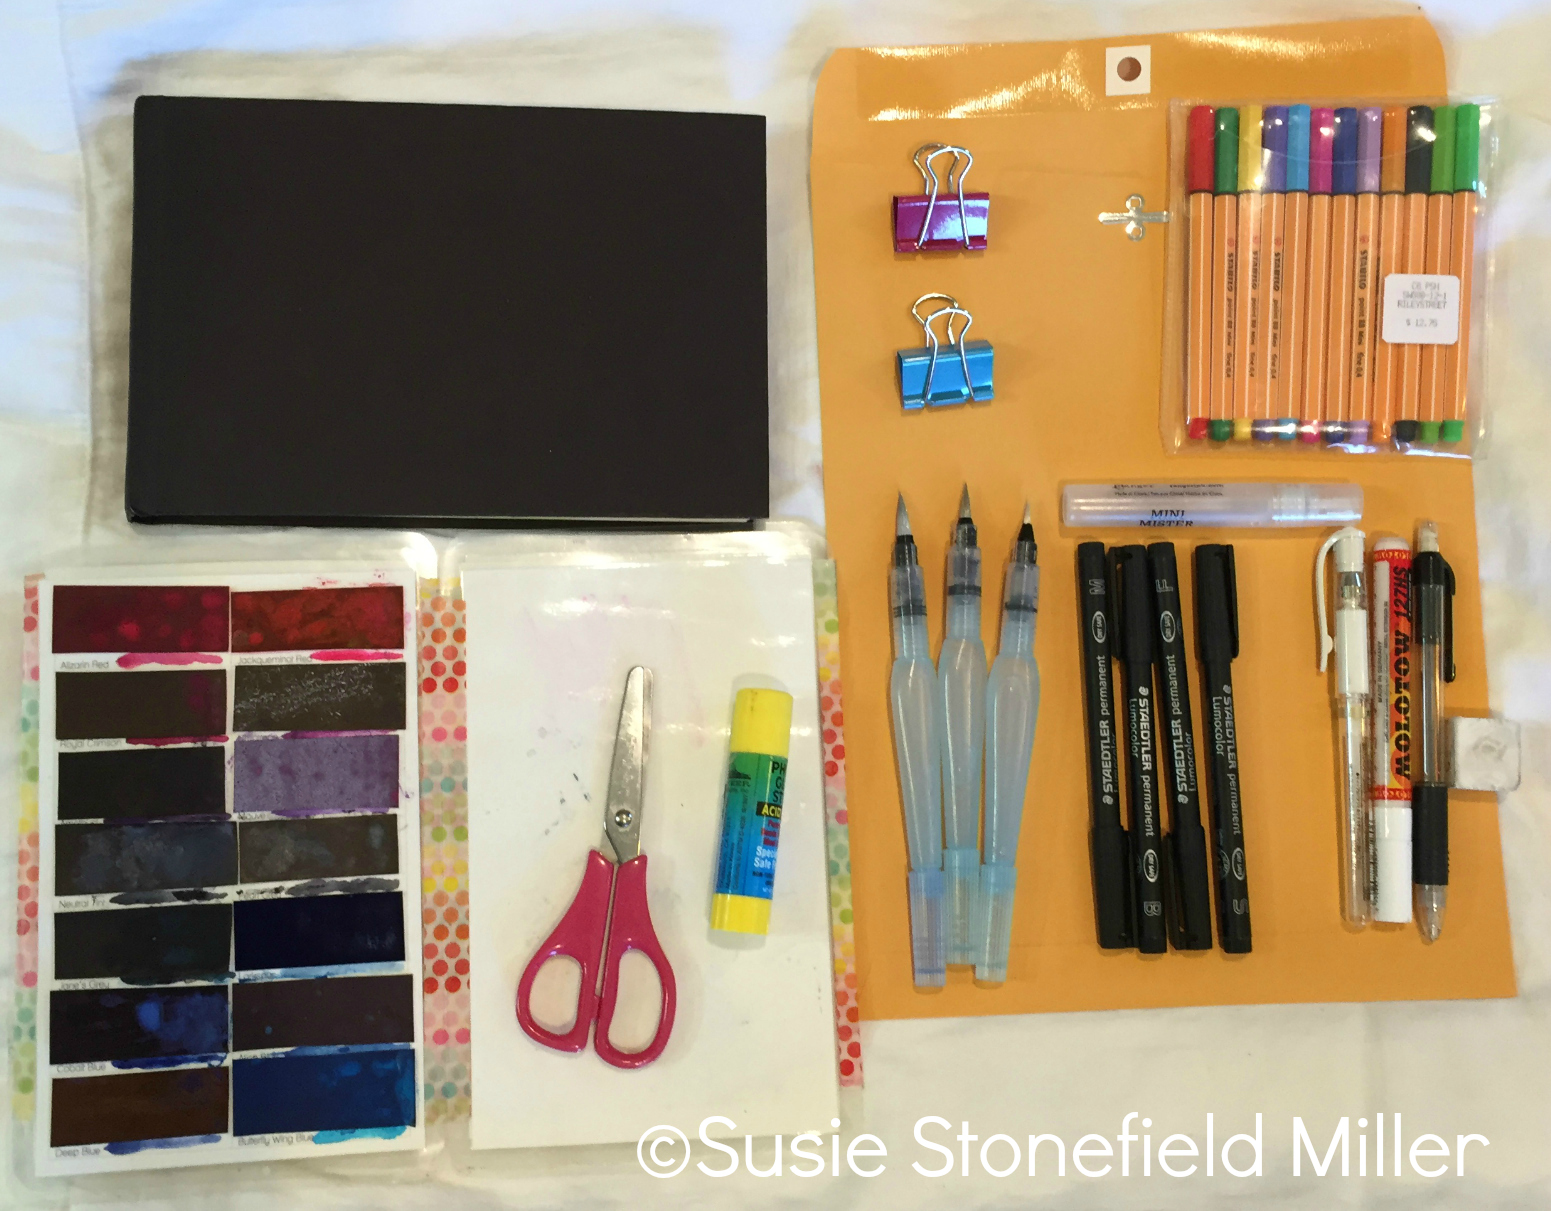 Travel Art Journaling: My Kit and My Process • Unfold Your